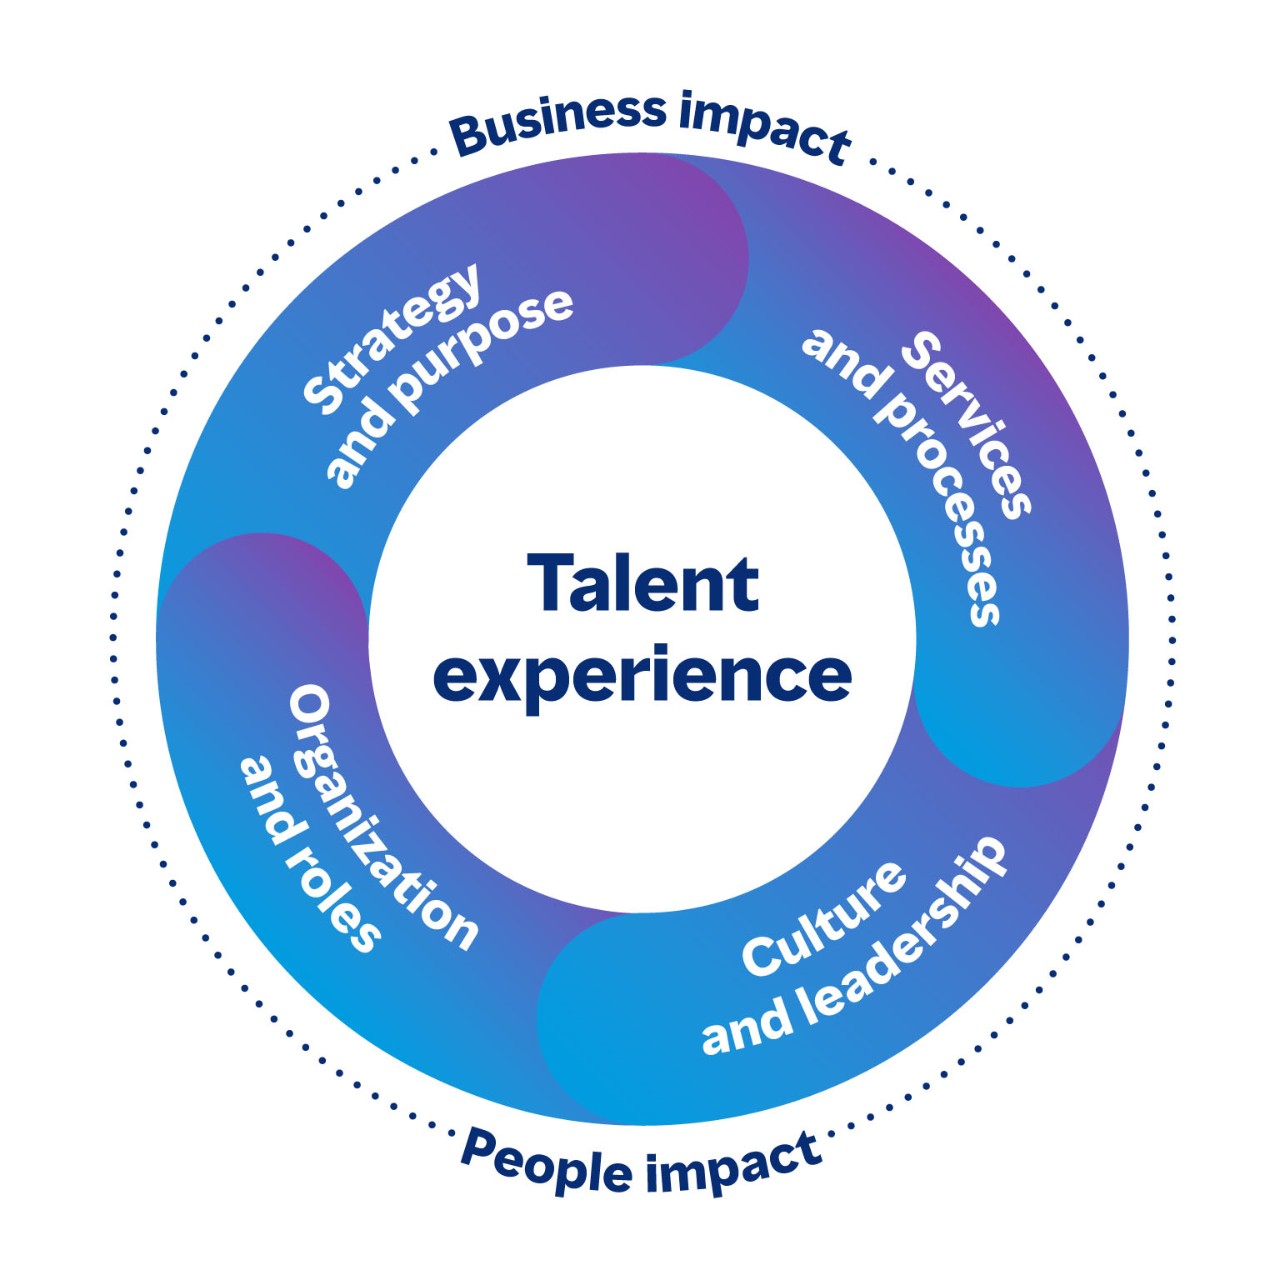 Circular image showing the connected areas of the talent experience that have both a business and people impact. The four areas are Strategy and purpose, Services and processes, Culture and leadership, and organization and roles.